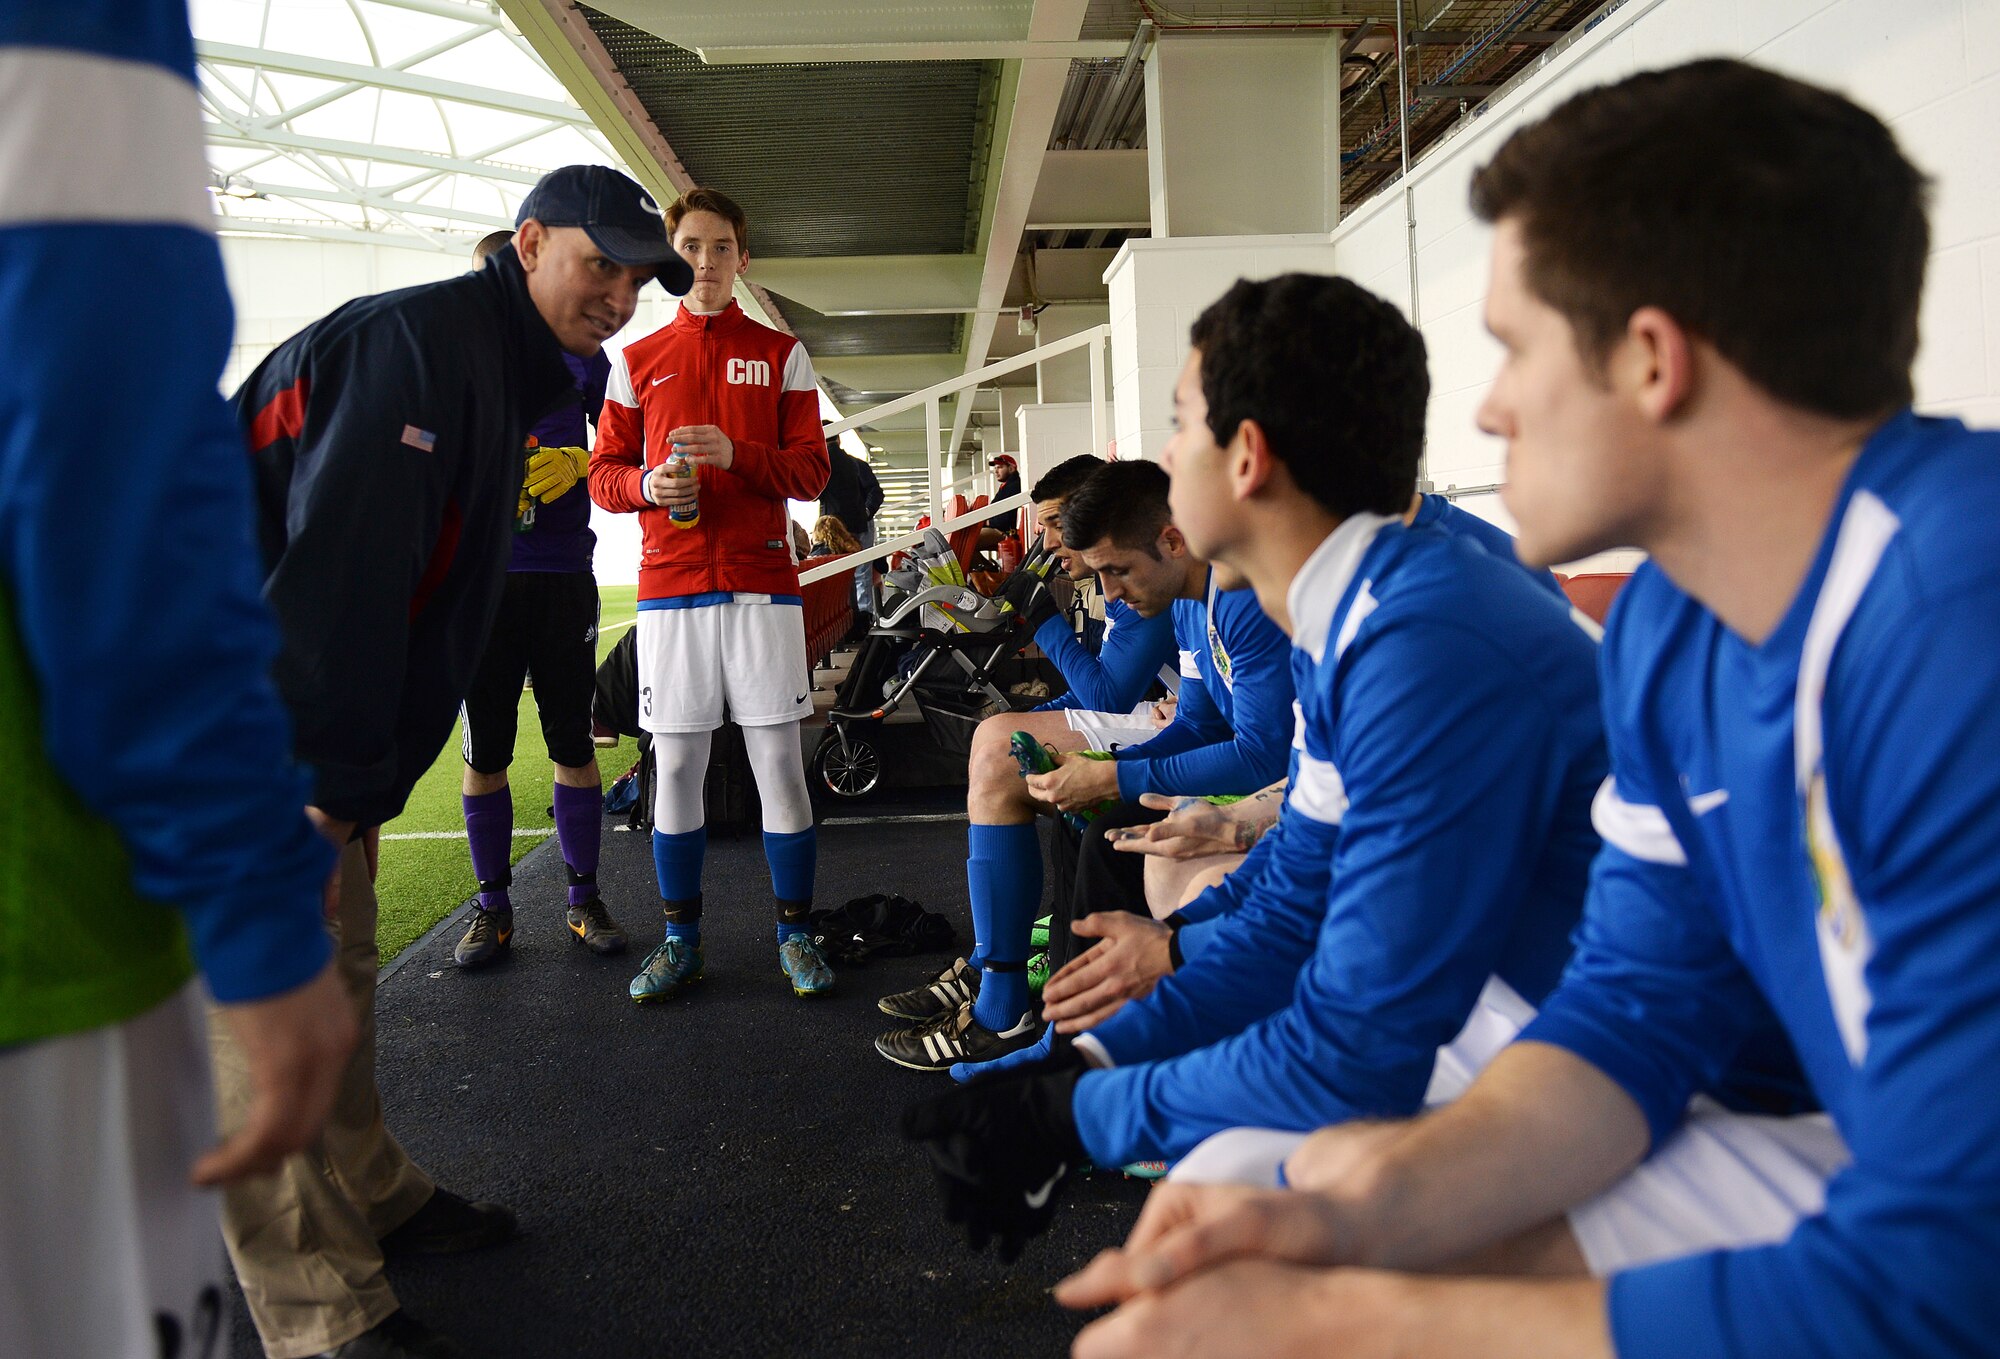 Lt. Col. Derrick Weyand, head coach for the Liberty Football Club, discusses strategies for the second half of the game during a match against the world-ranked England Cerebral Palsy team at St. George’s Park, England, Jan. 25, 2015. Active duty members, dependents and high school students are welcome to join the Liberty Football Club. (U.S. Air Force photo by Staff Sgt. Emerson Nuñez/Released)